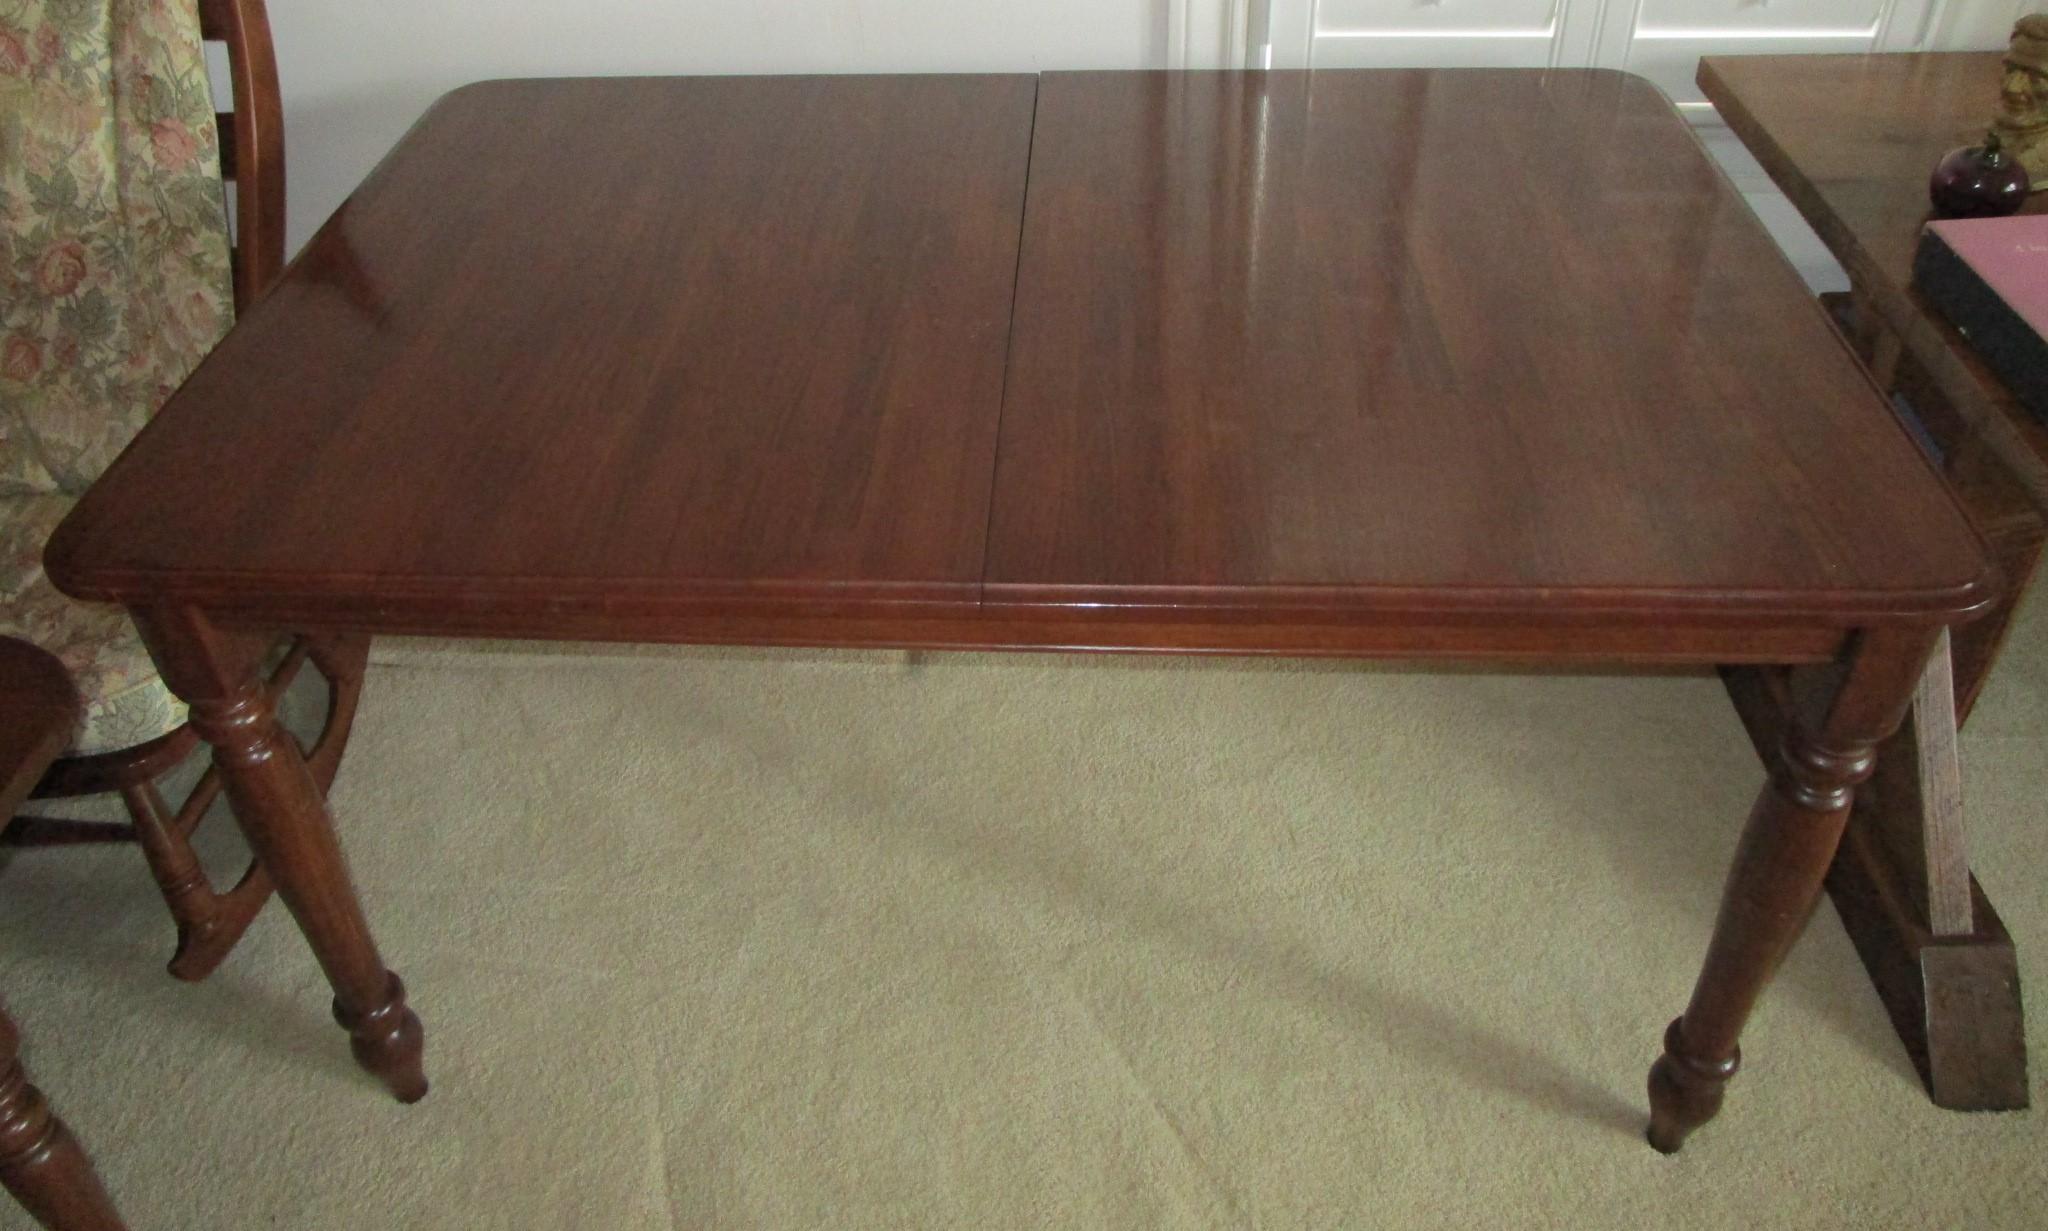 Mahogany Dining Table w/2 Stored Leaves by Universal Furniture